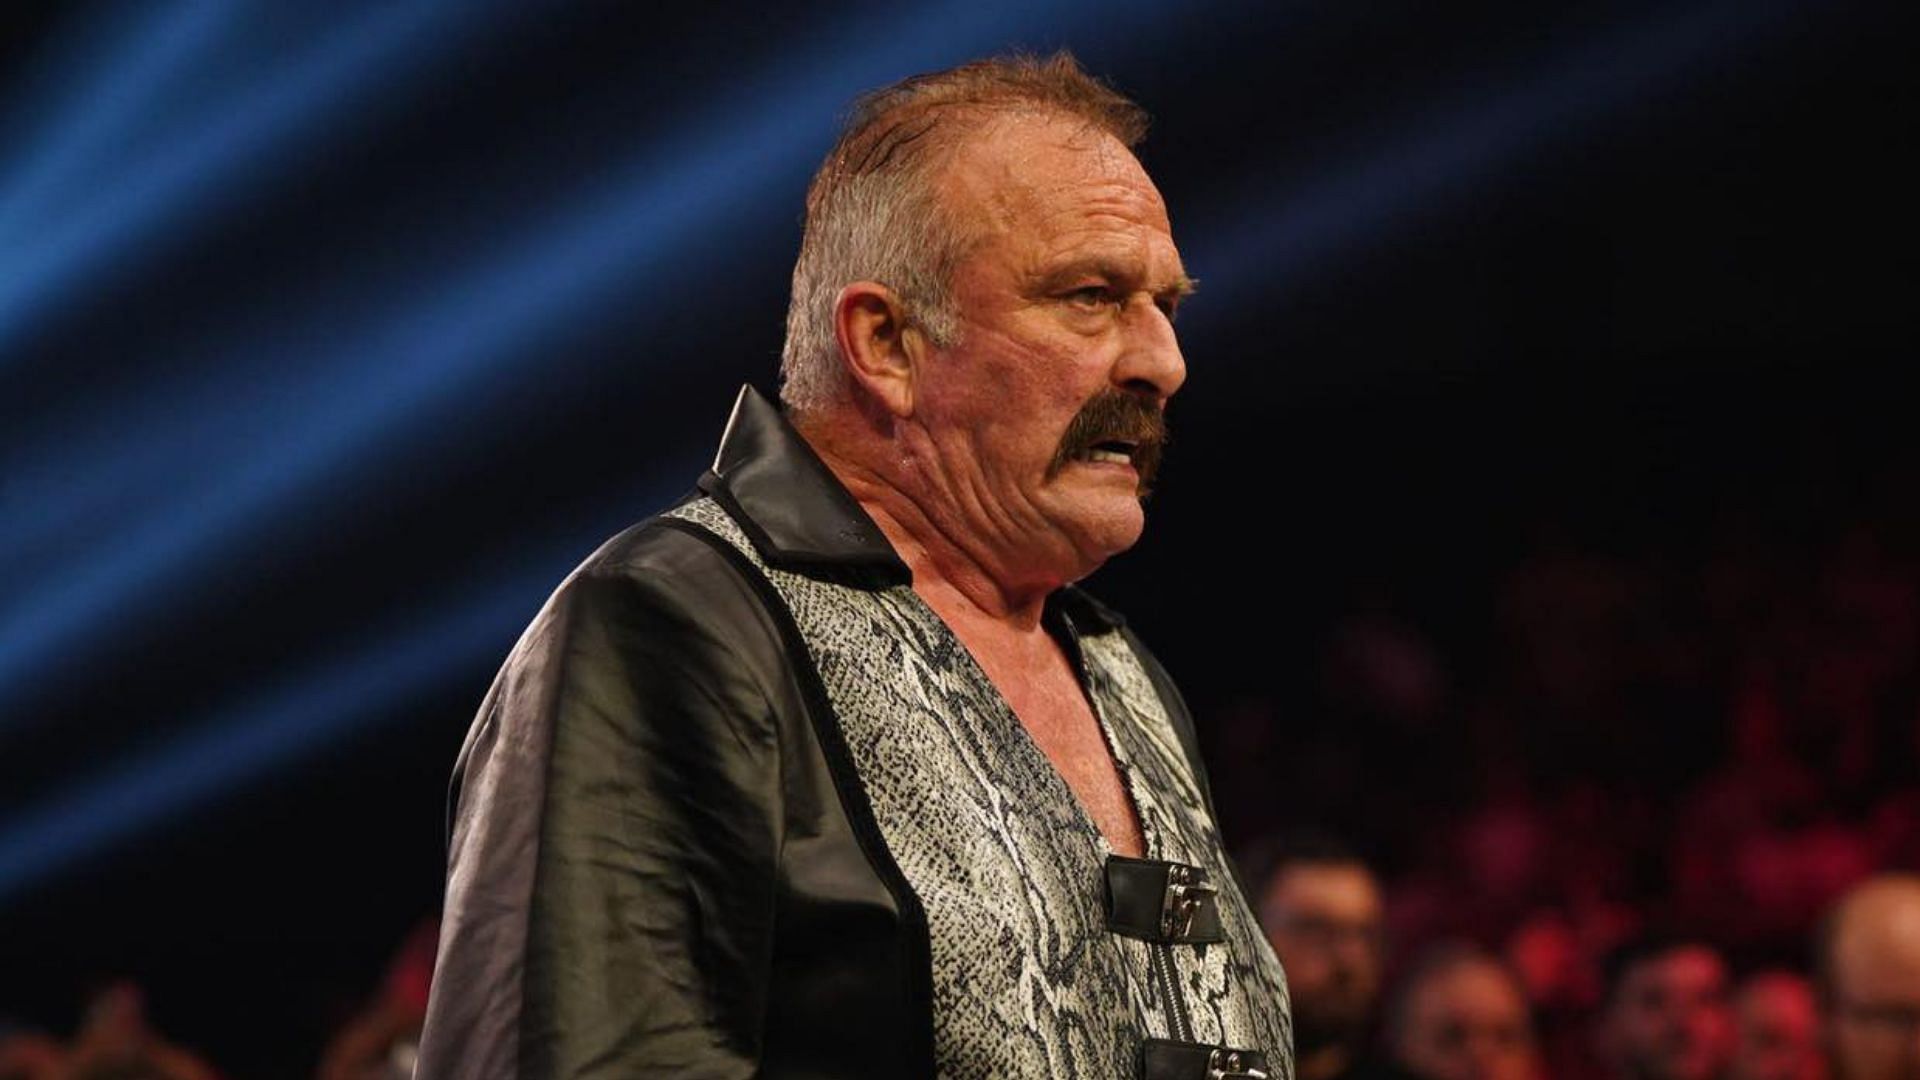 What is missing from modern wrestling in the eyes of Jake Roberts?